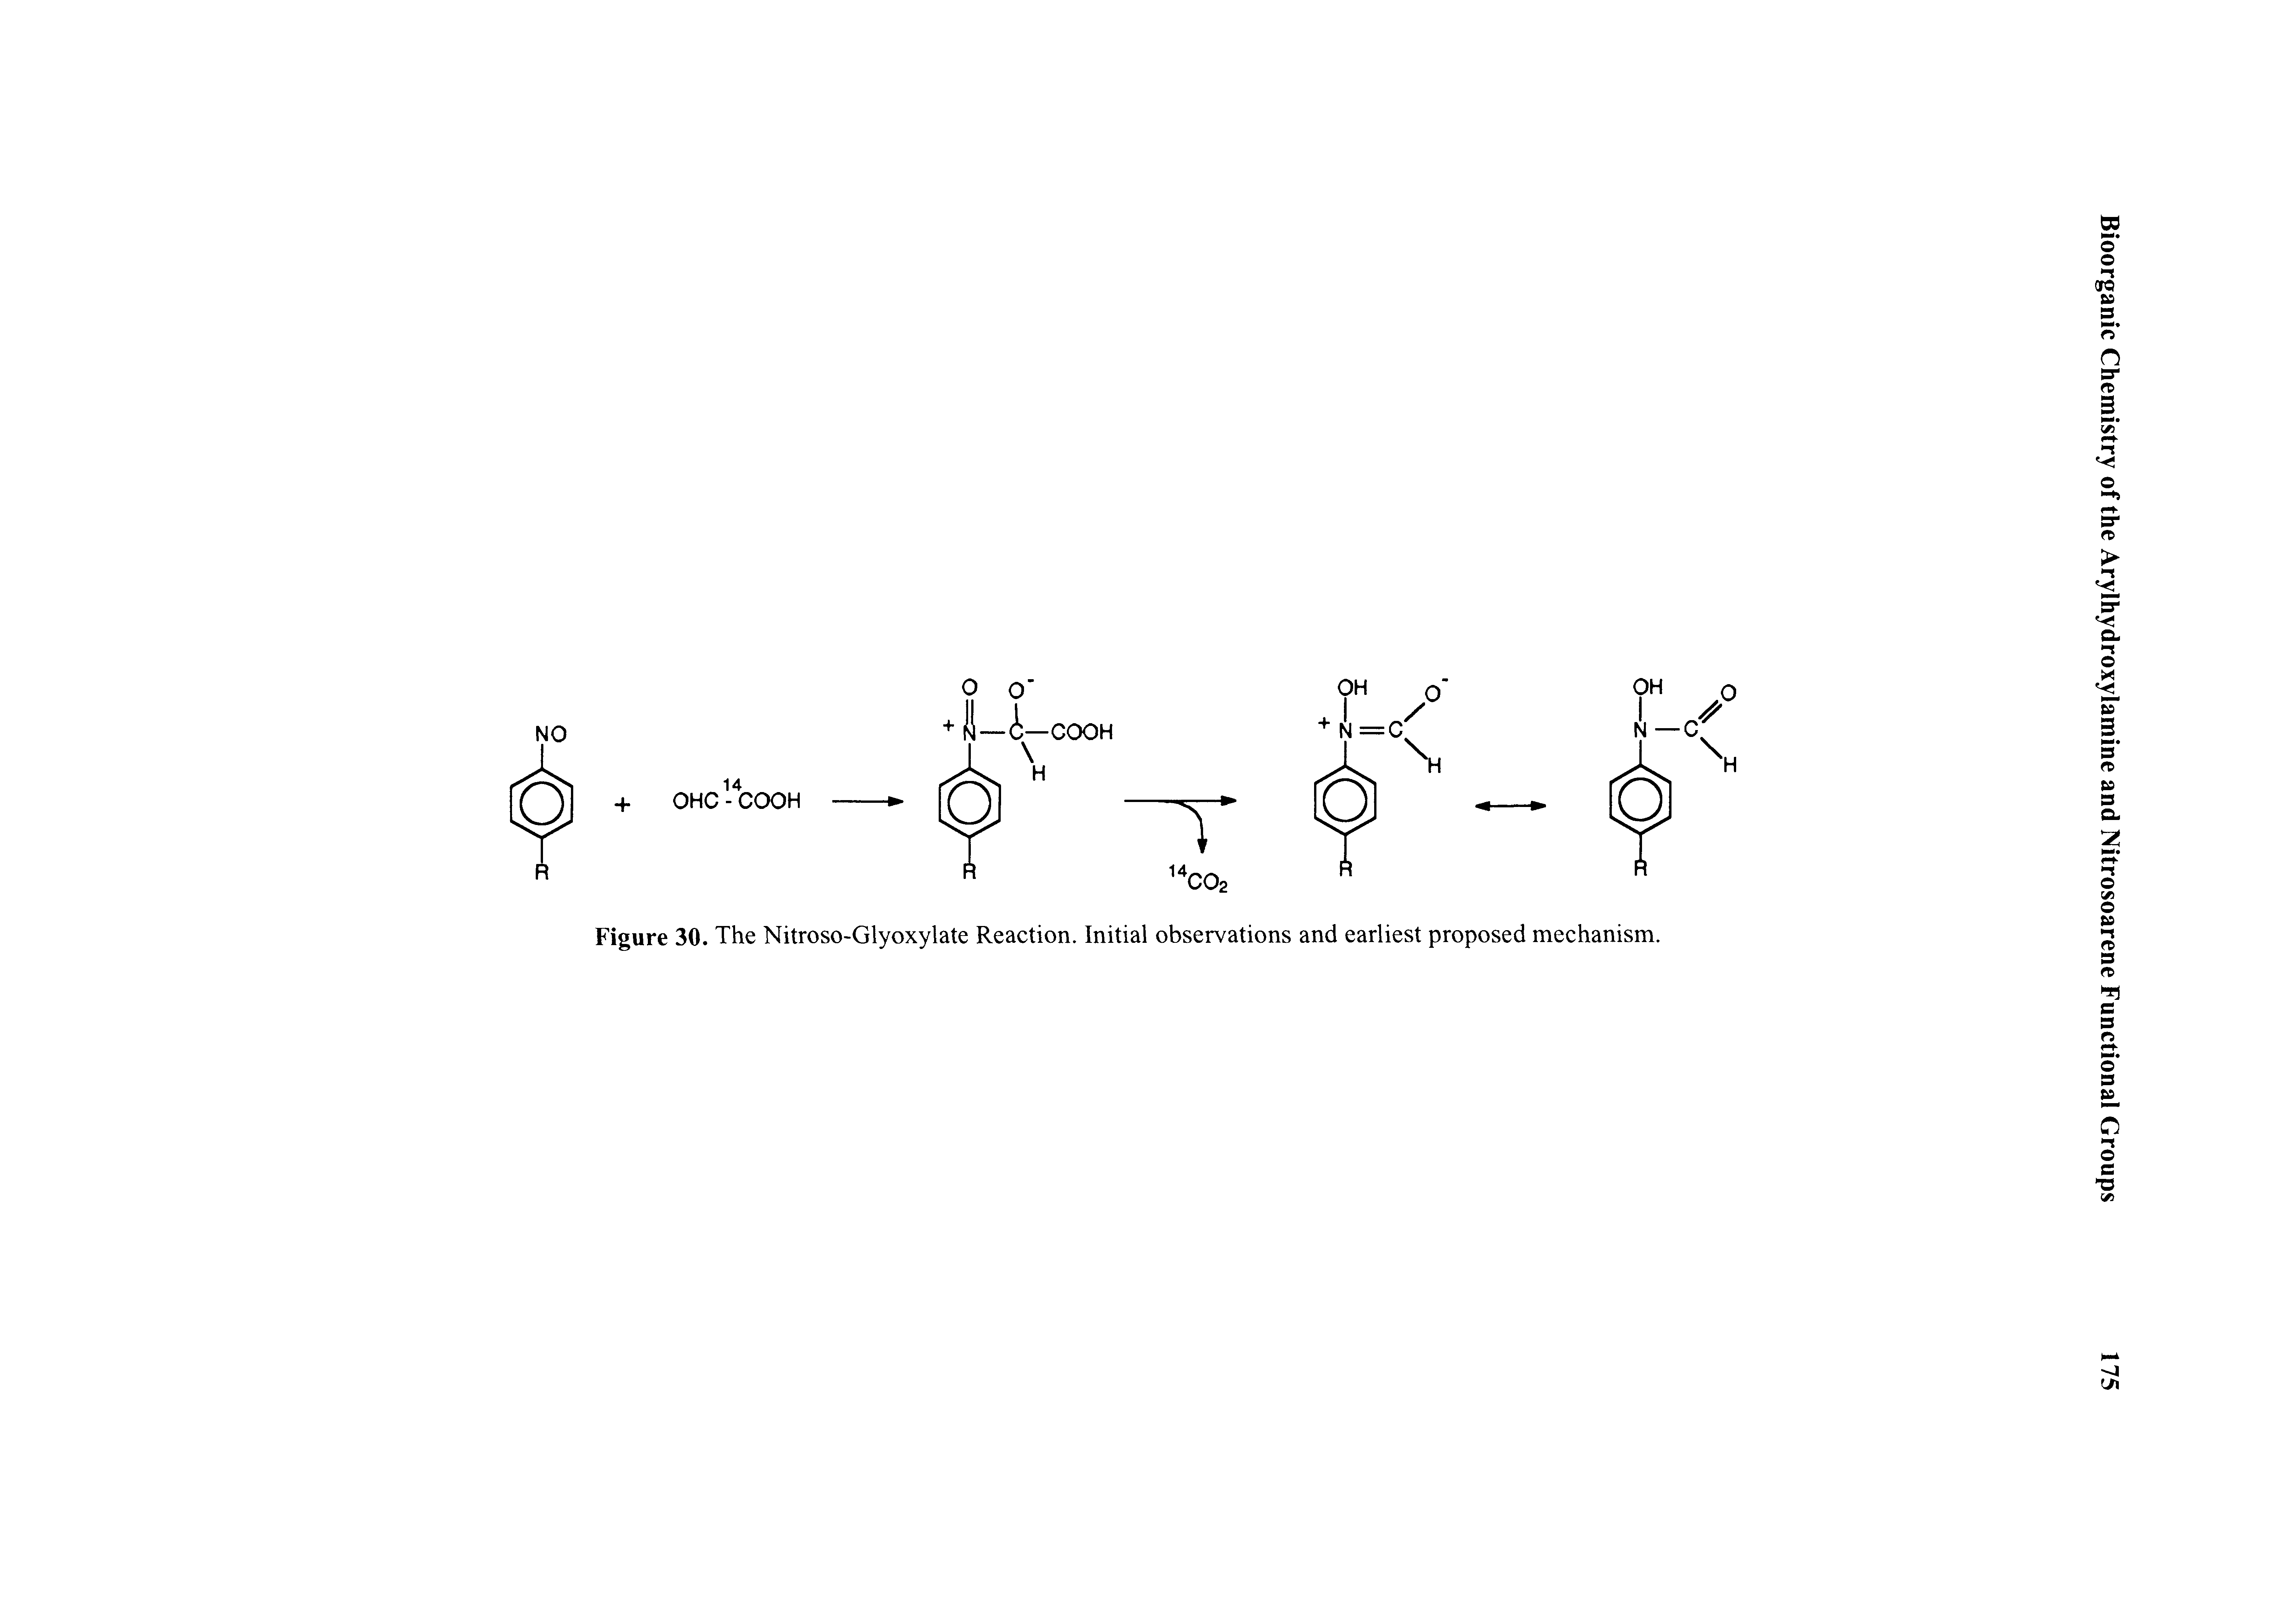 Figure 30. The Nitroso-Glyoxylate Reaction. Initial observations and earliest proposed mechanism.